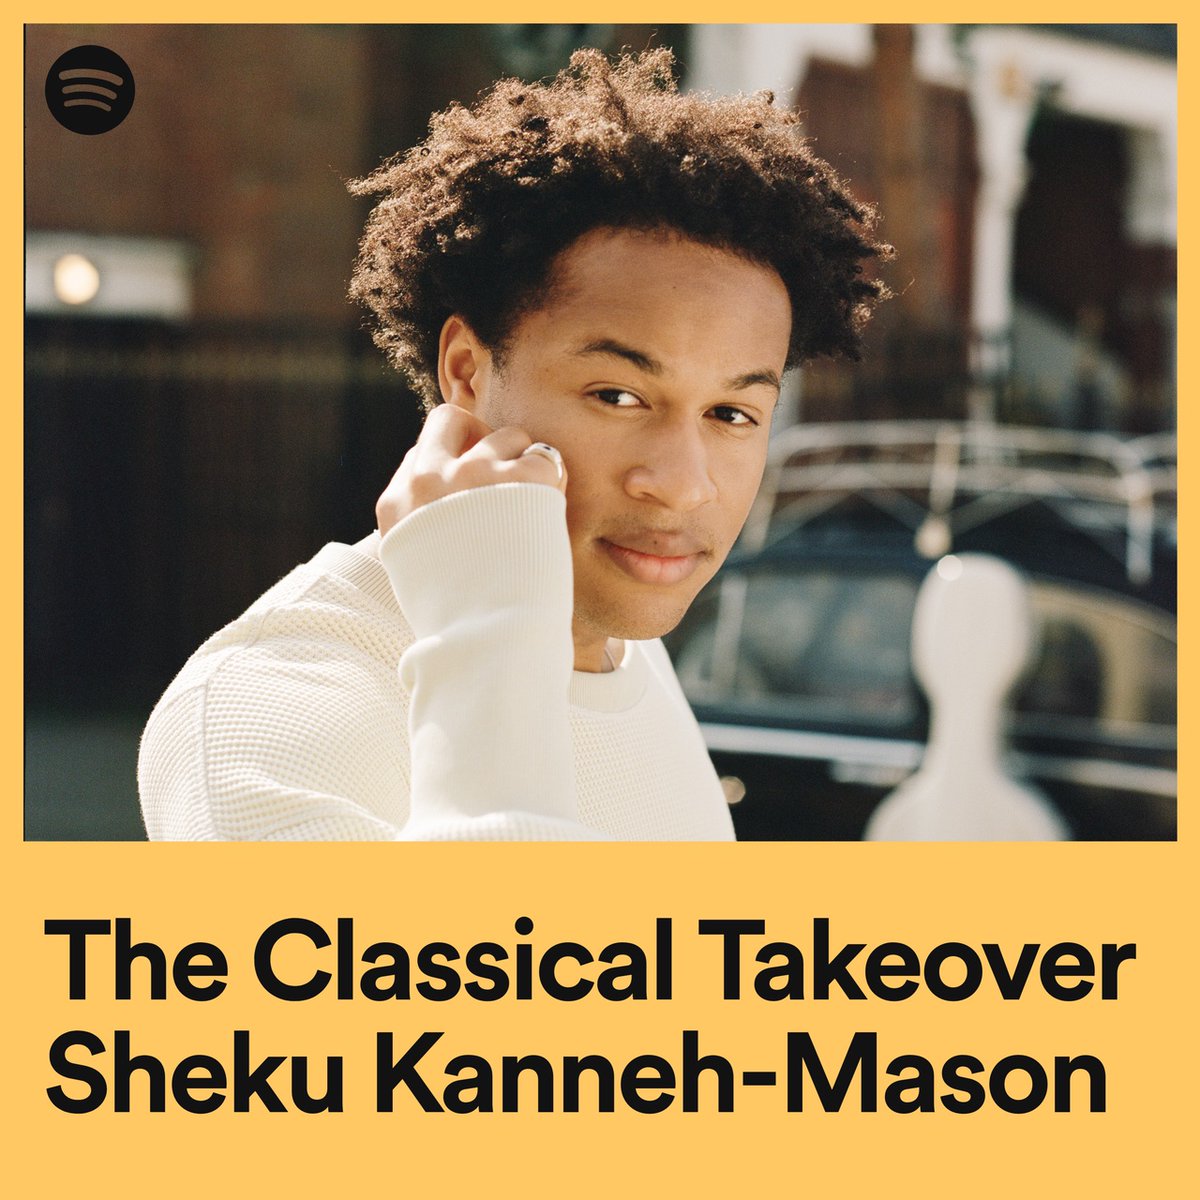 I had so much fun compiling my @Spotify Classical Music October Takeover playlist! Check it out now, and let me know if there any pieces you’d have added🙏🏾 open.spotify.com/playlist/37i9d…